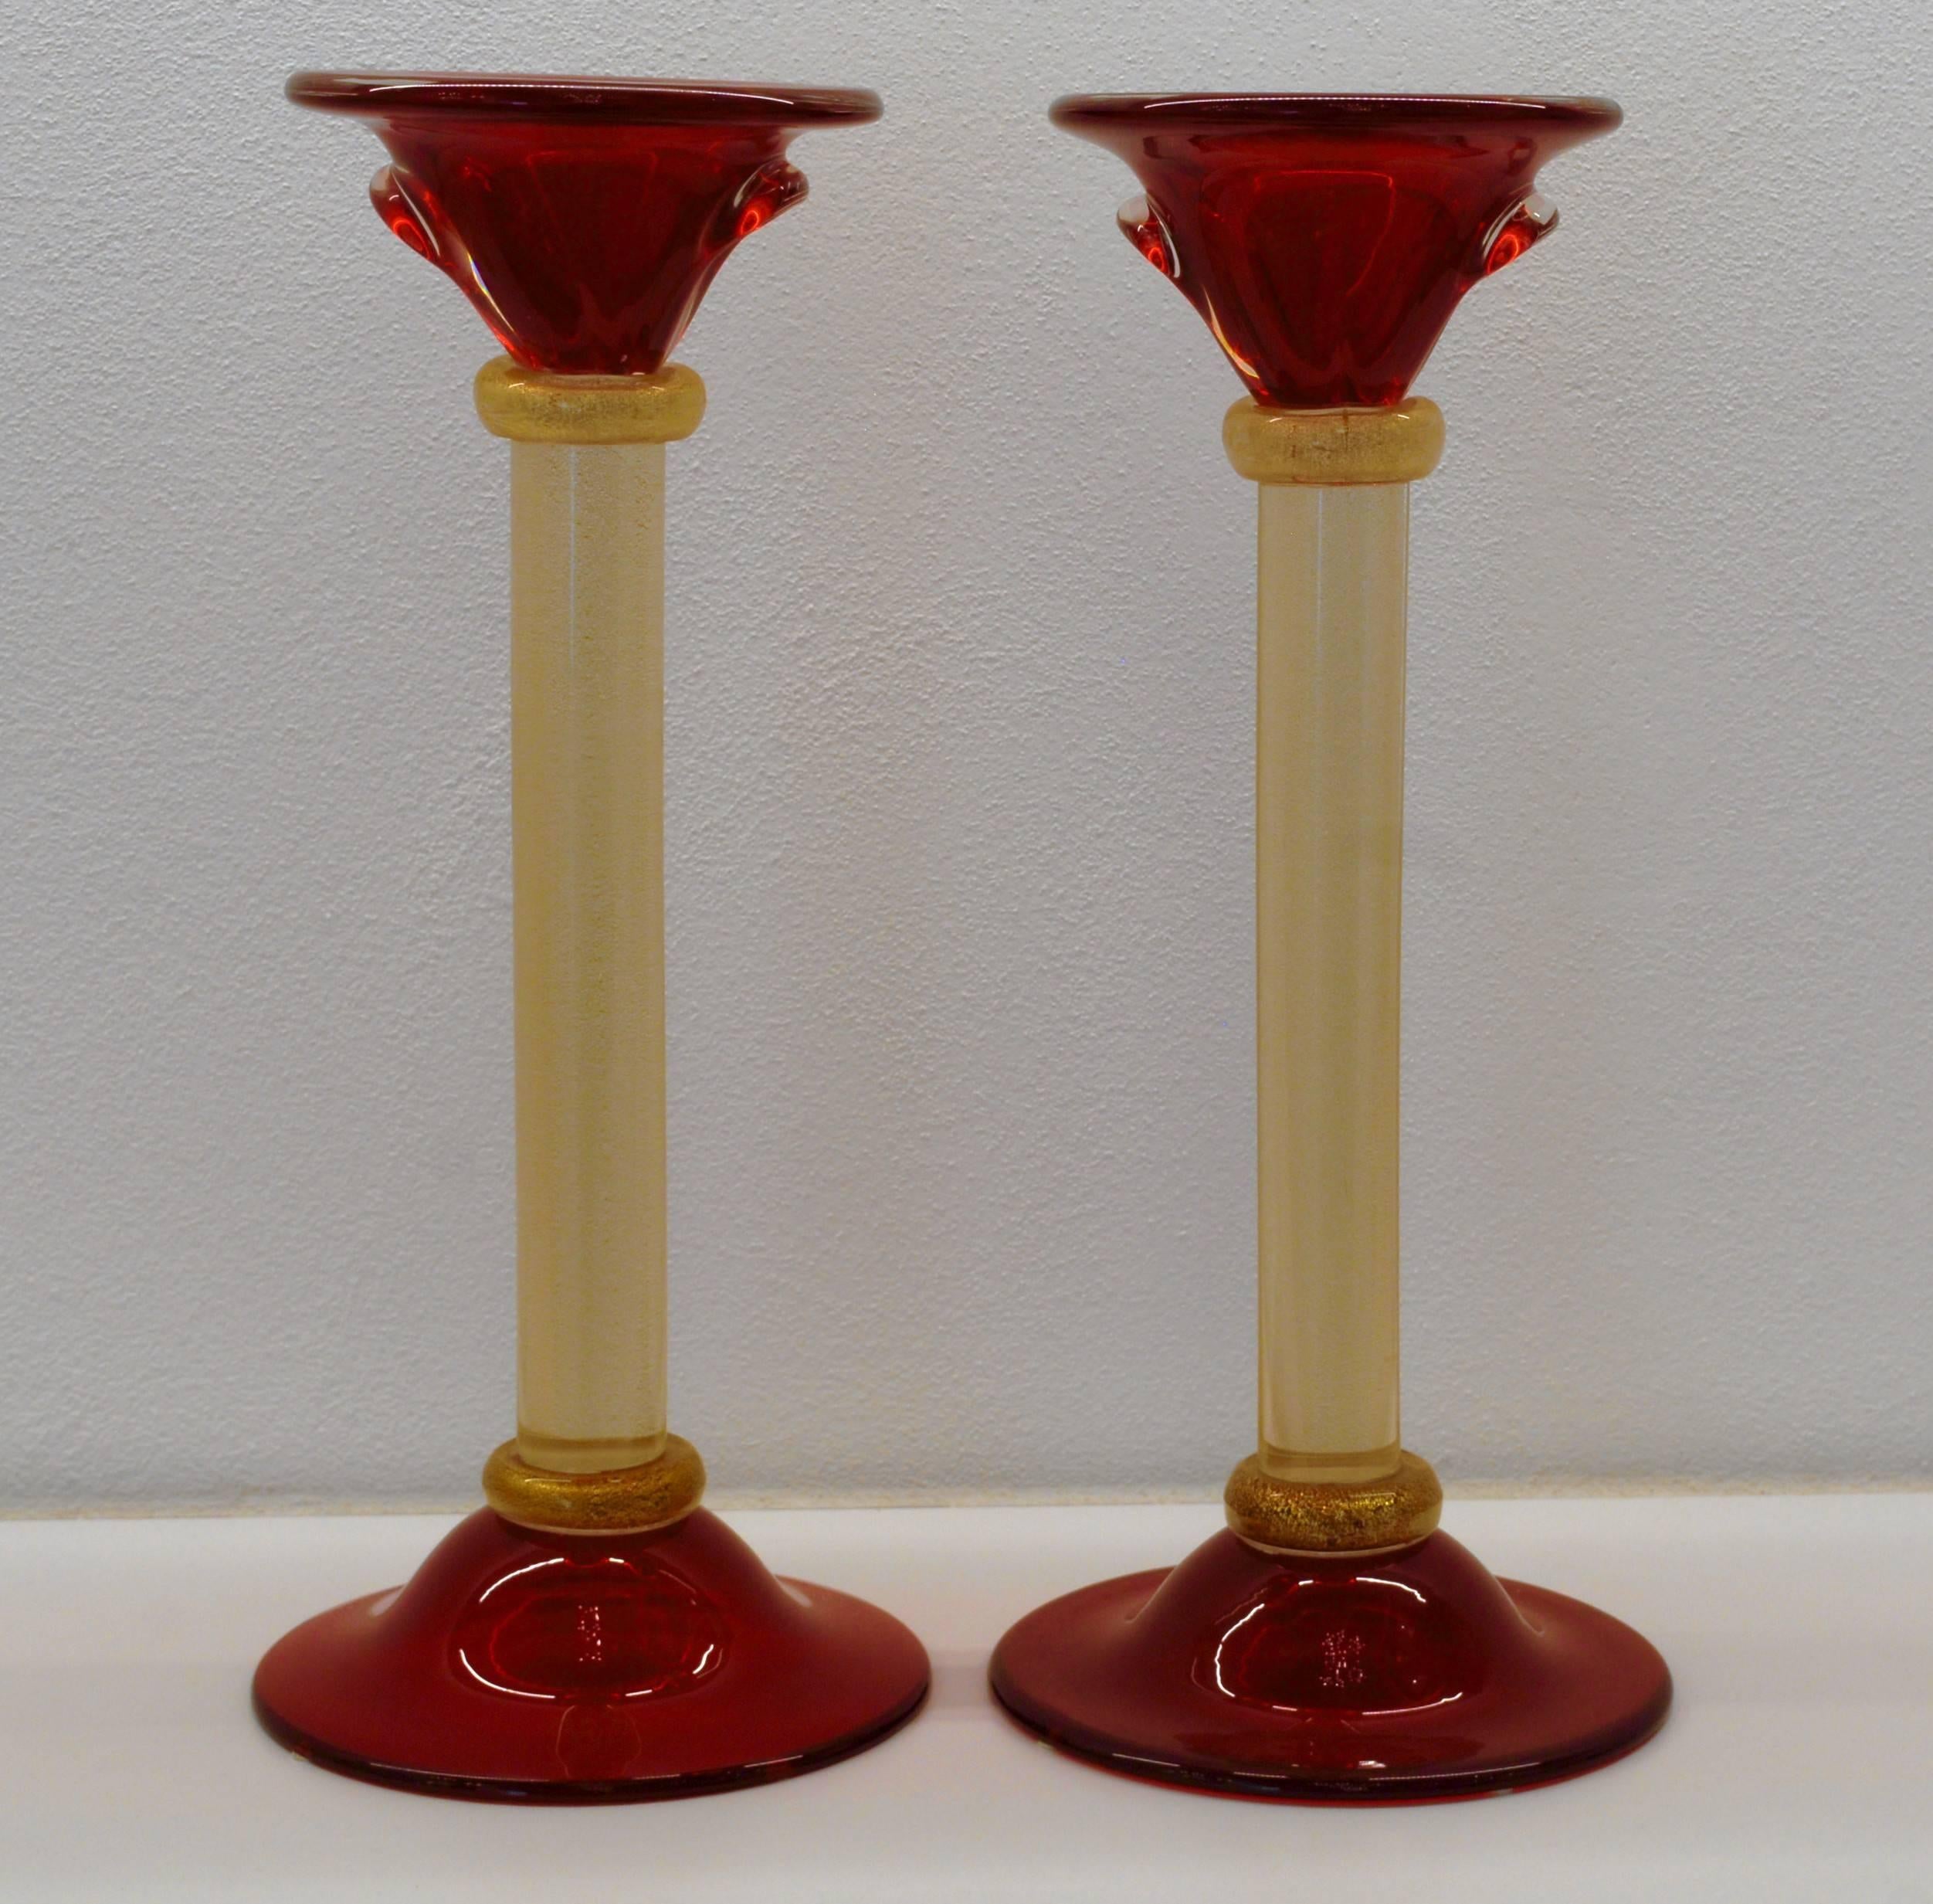 Modern Pair of Candlesticks, Romano Dona, Massiccio, Red and Gold Leaf, Murano